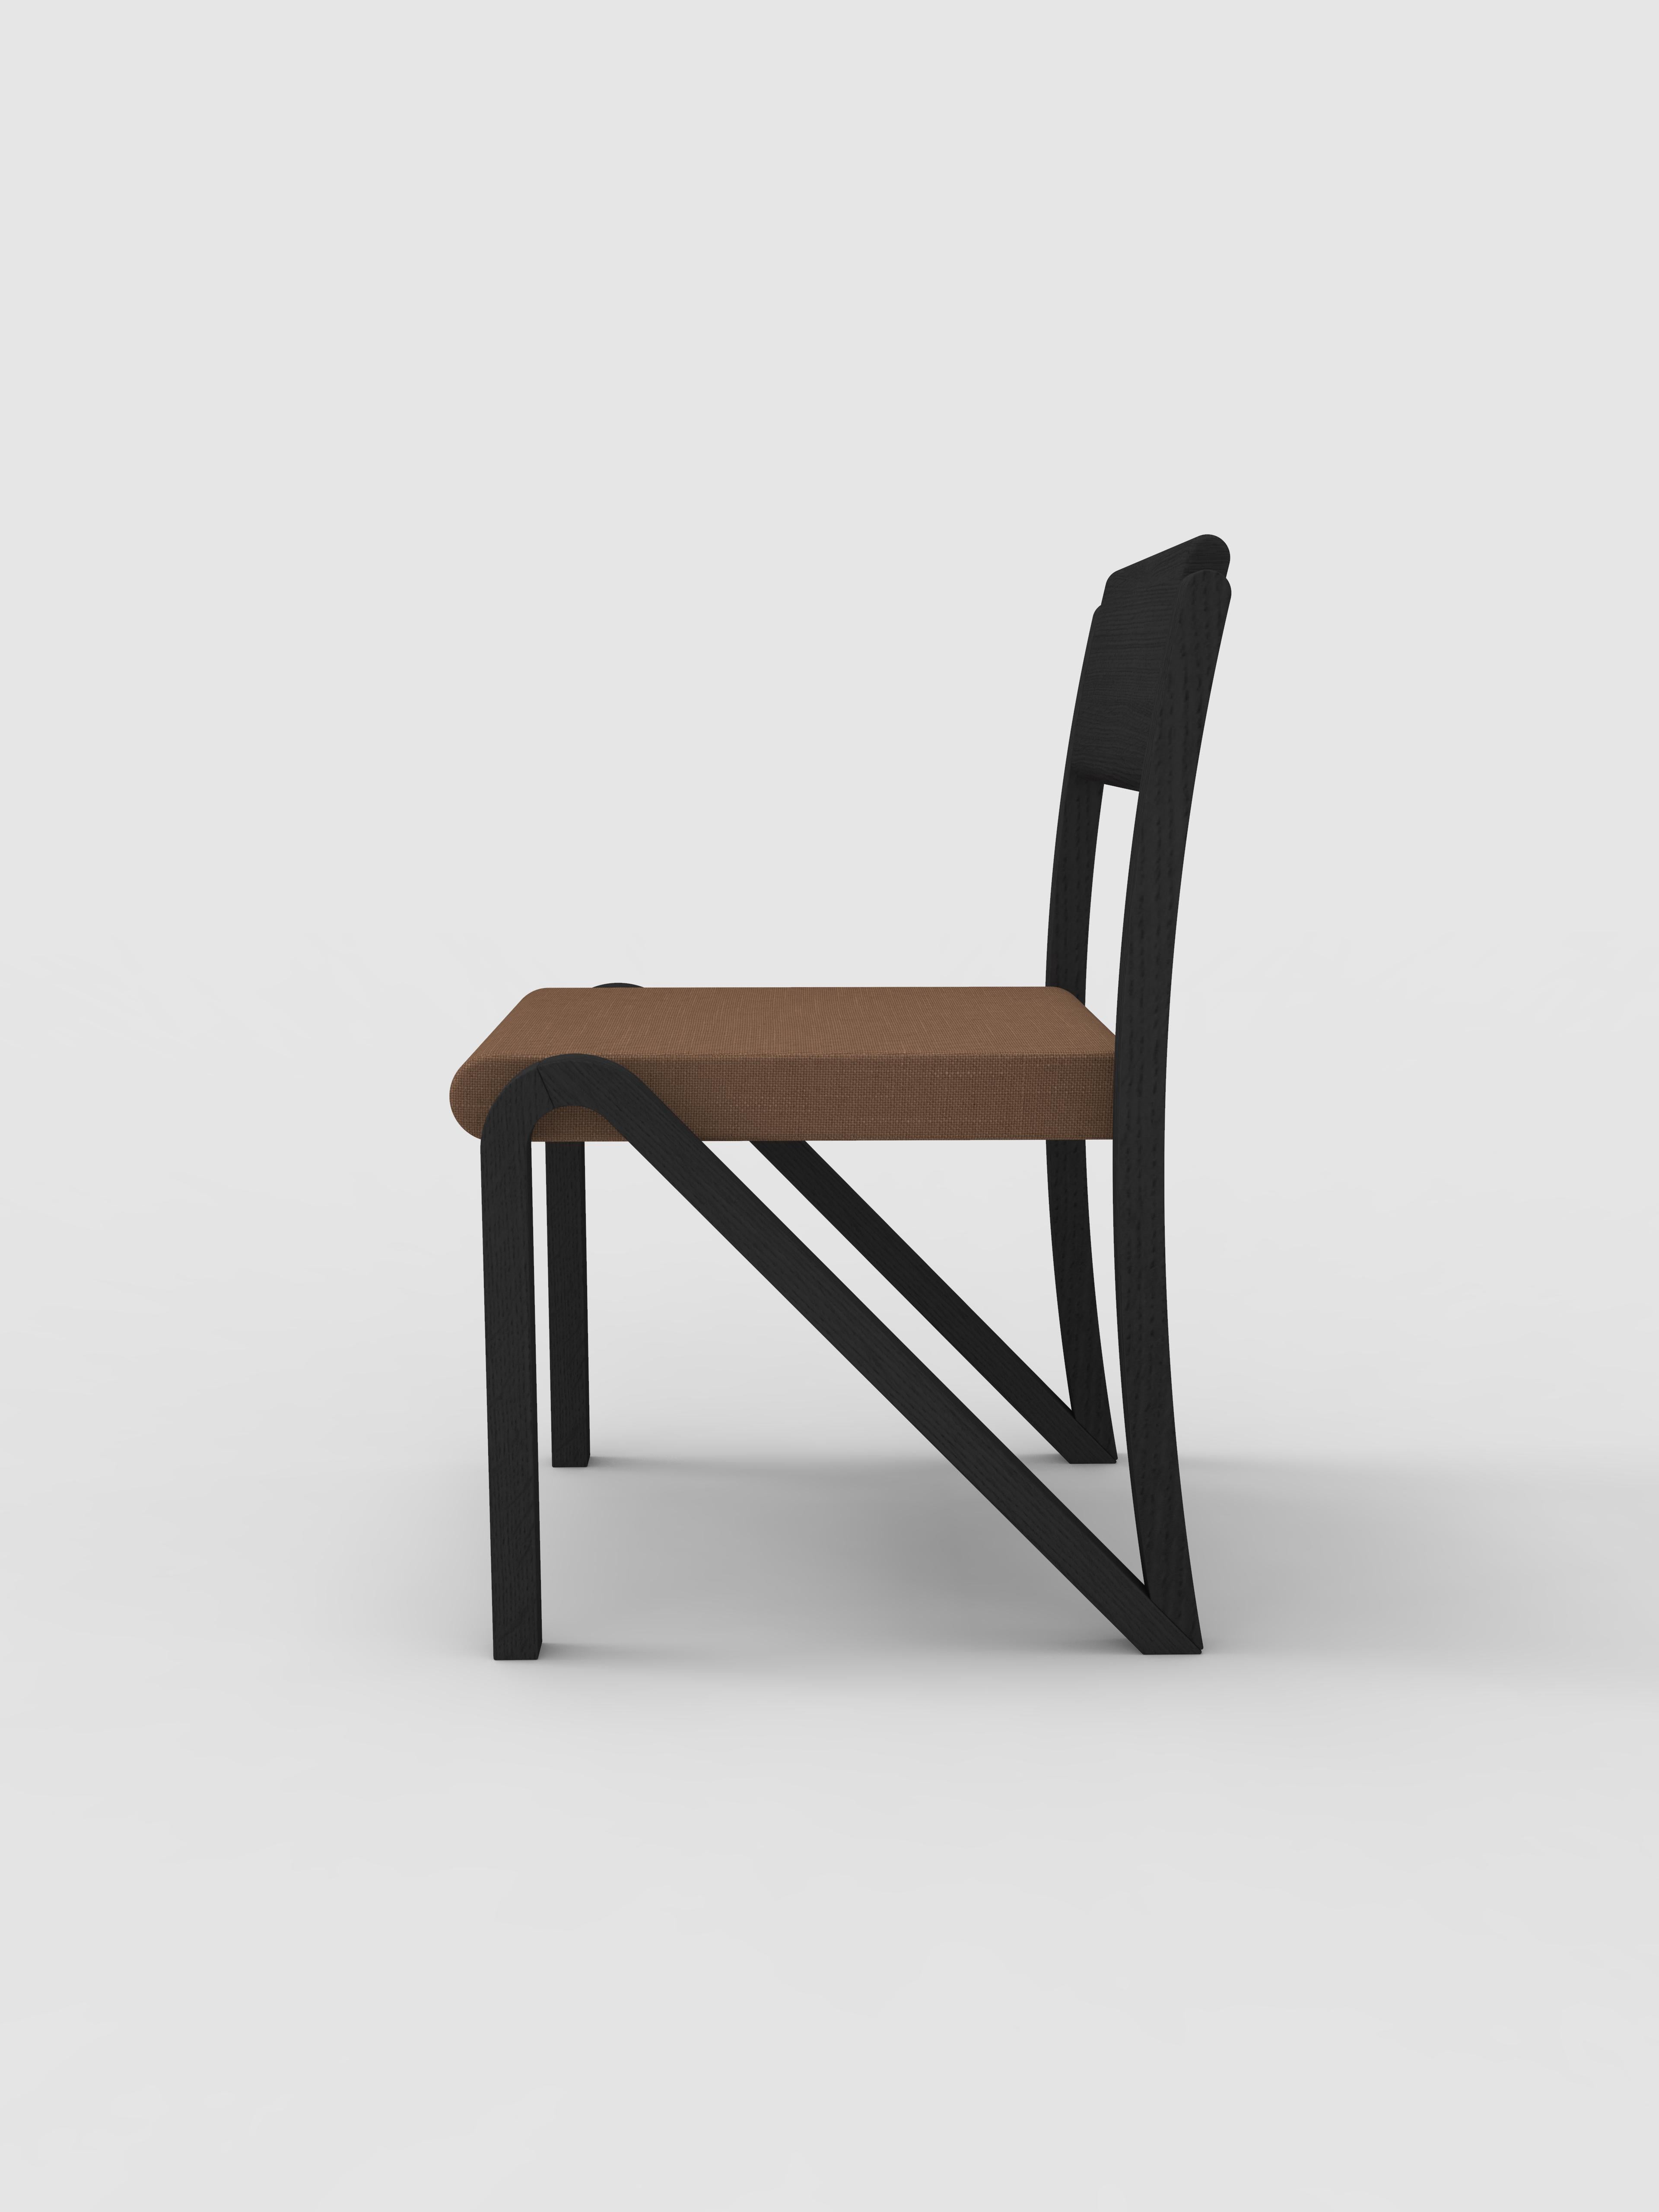 Orphan Work 200 side chair
Shown in blackened oak with upholstered seat 
Measures: 19 3/4” D x 17 1/2” W x 31” H
Available in natural oak or blackened oak

Orphan work is designed to complement in the heart of Soho, New York City. Each piece is